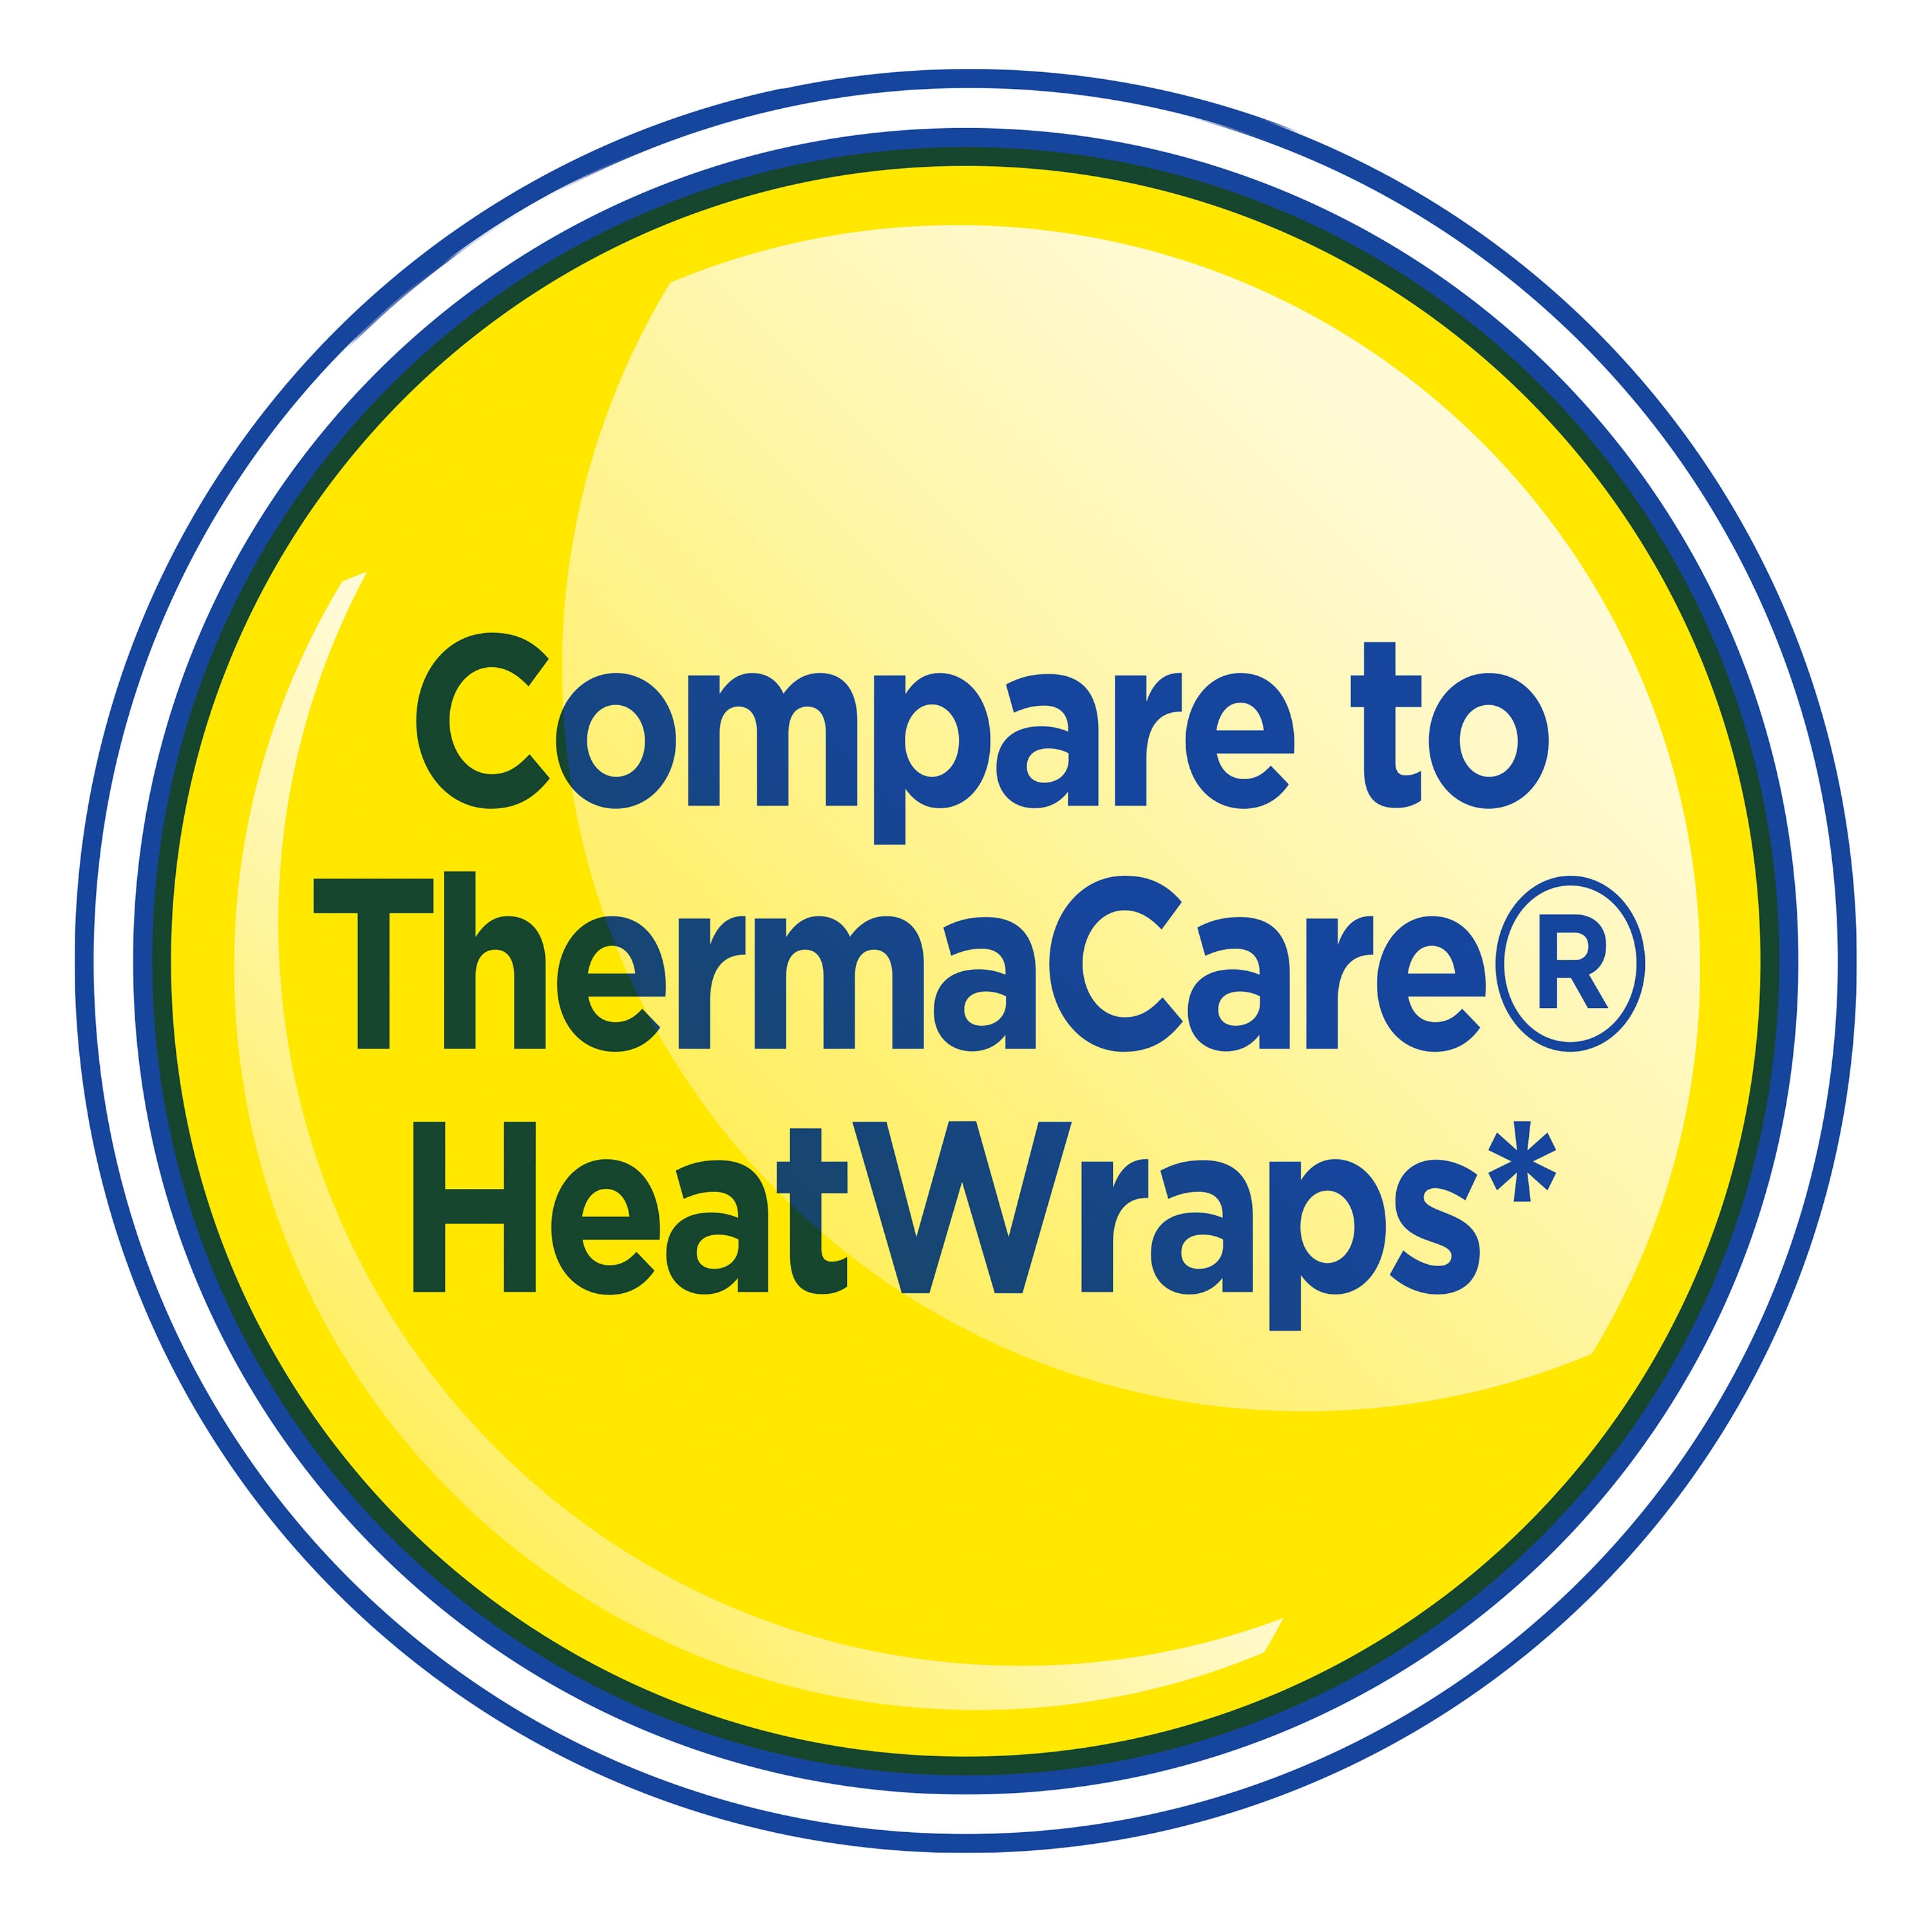 Equate Air Activated Heat Wrap, 3 Treatments, 1 Wrap with 6 Pads